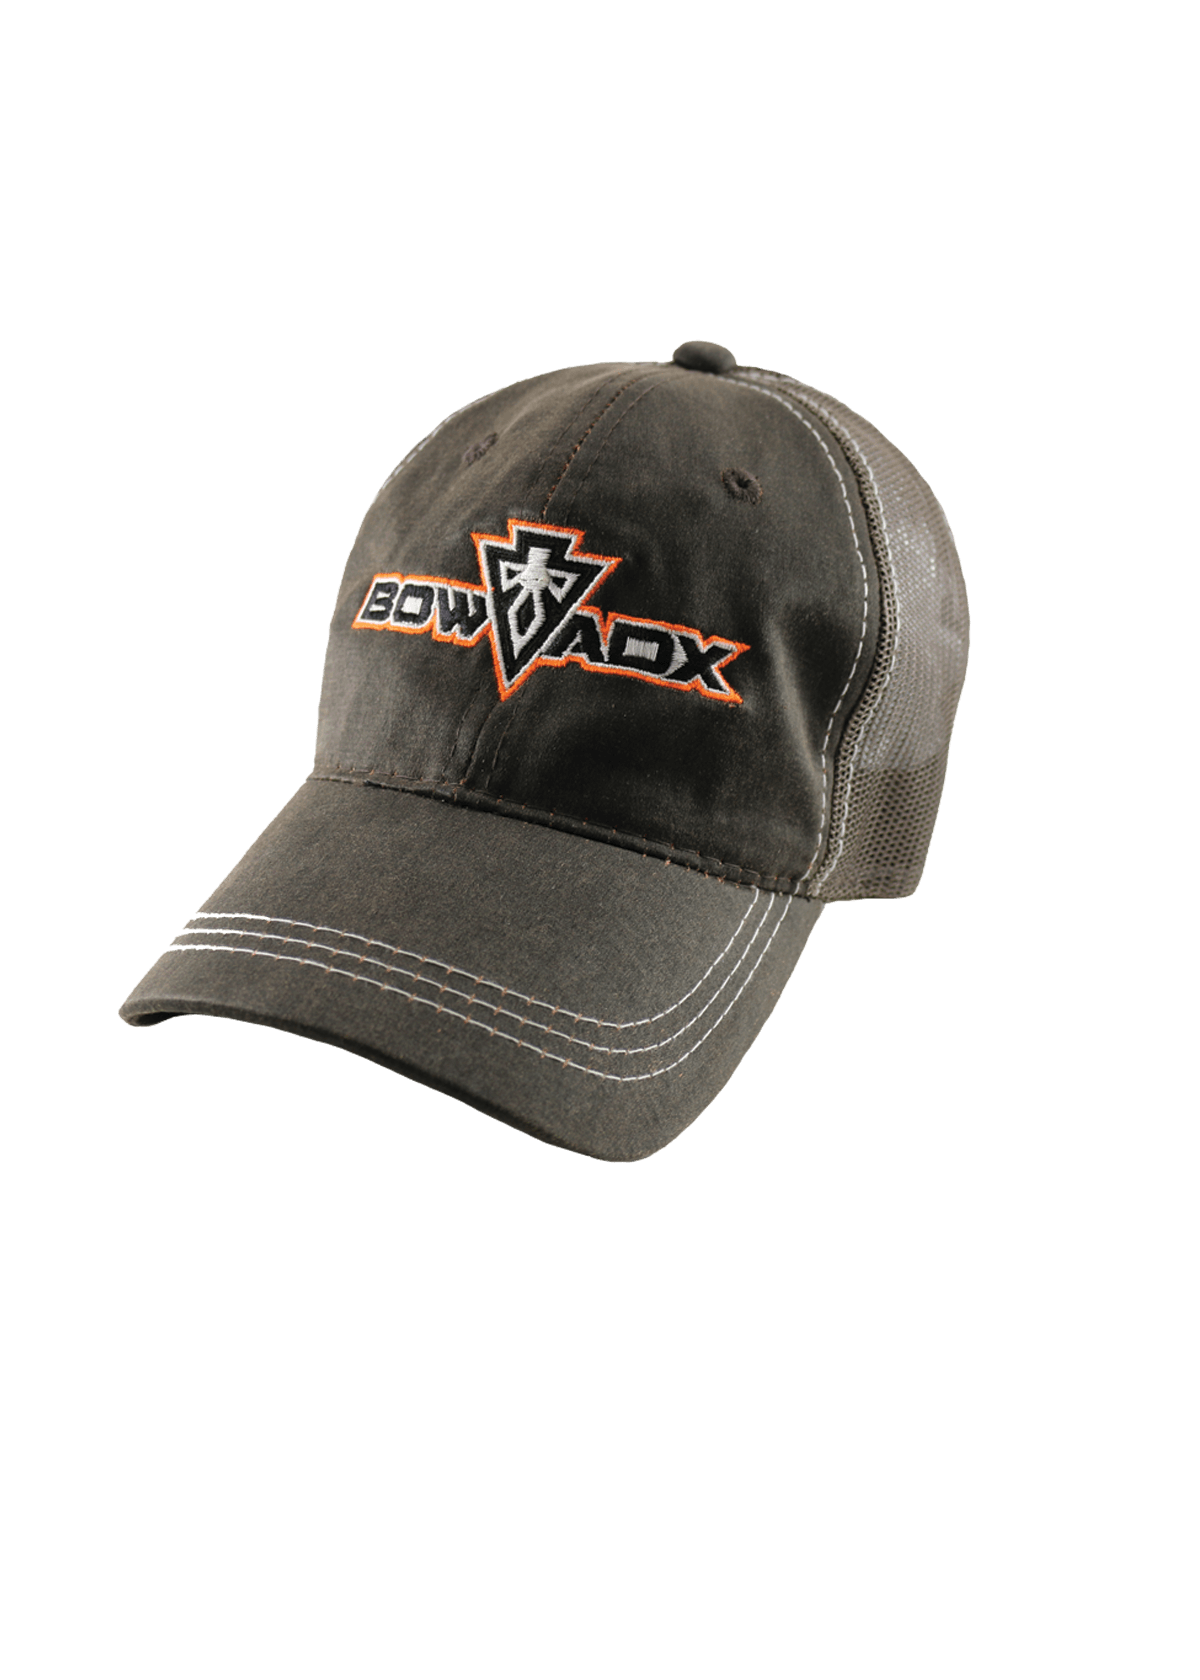 Hunting Apparel Logo - Rugged Brown Bow Hunting Hat with Orange Logo | Bow hunting t-shirts ...